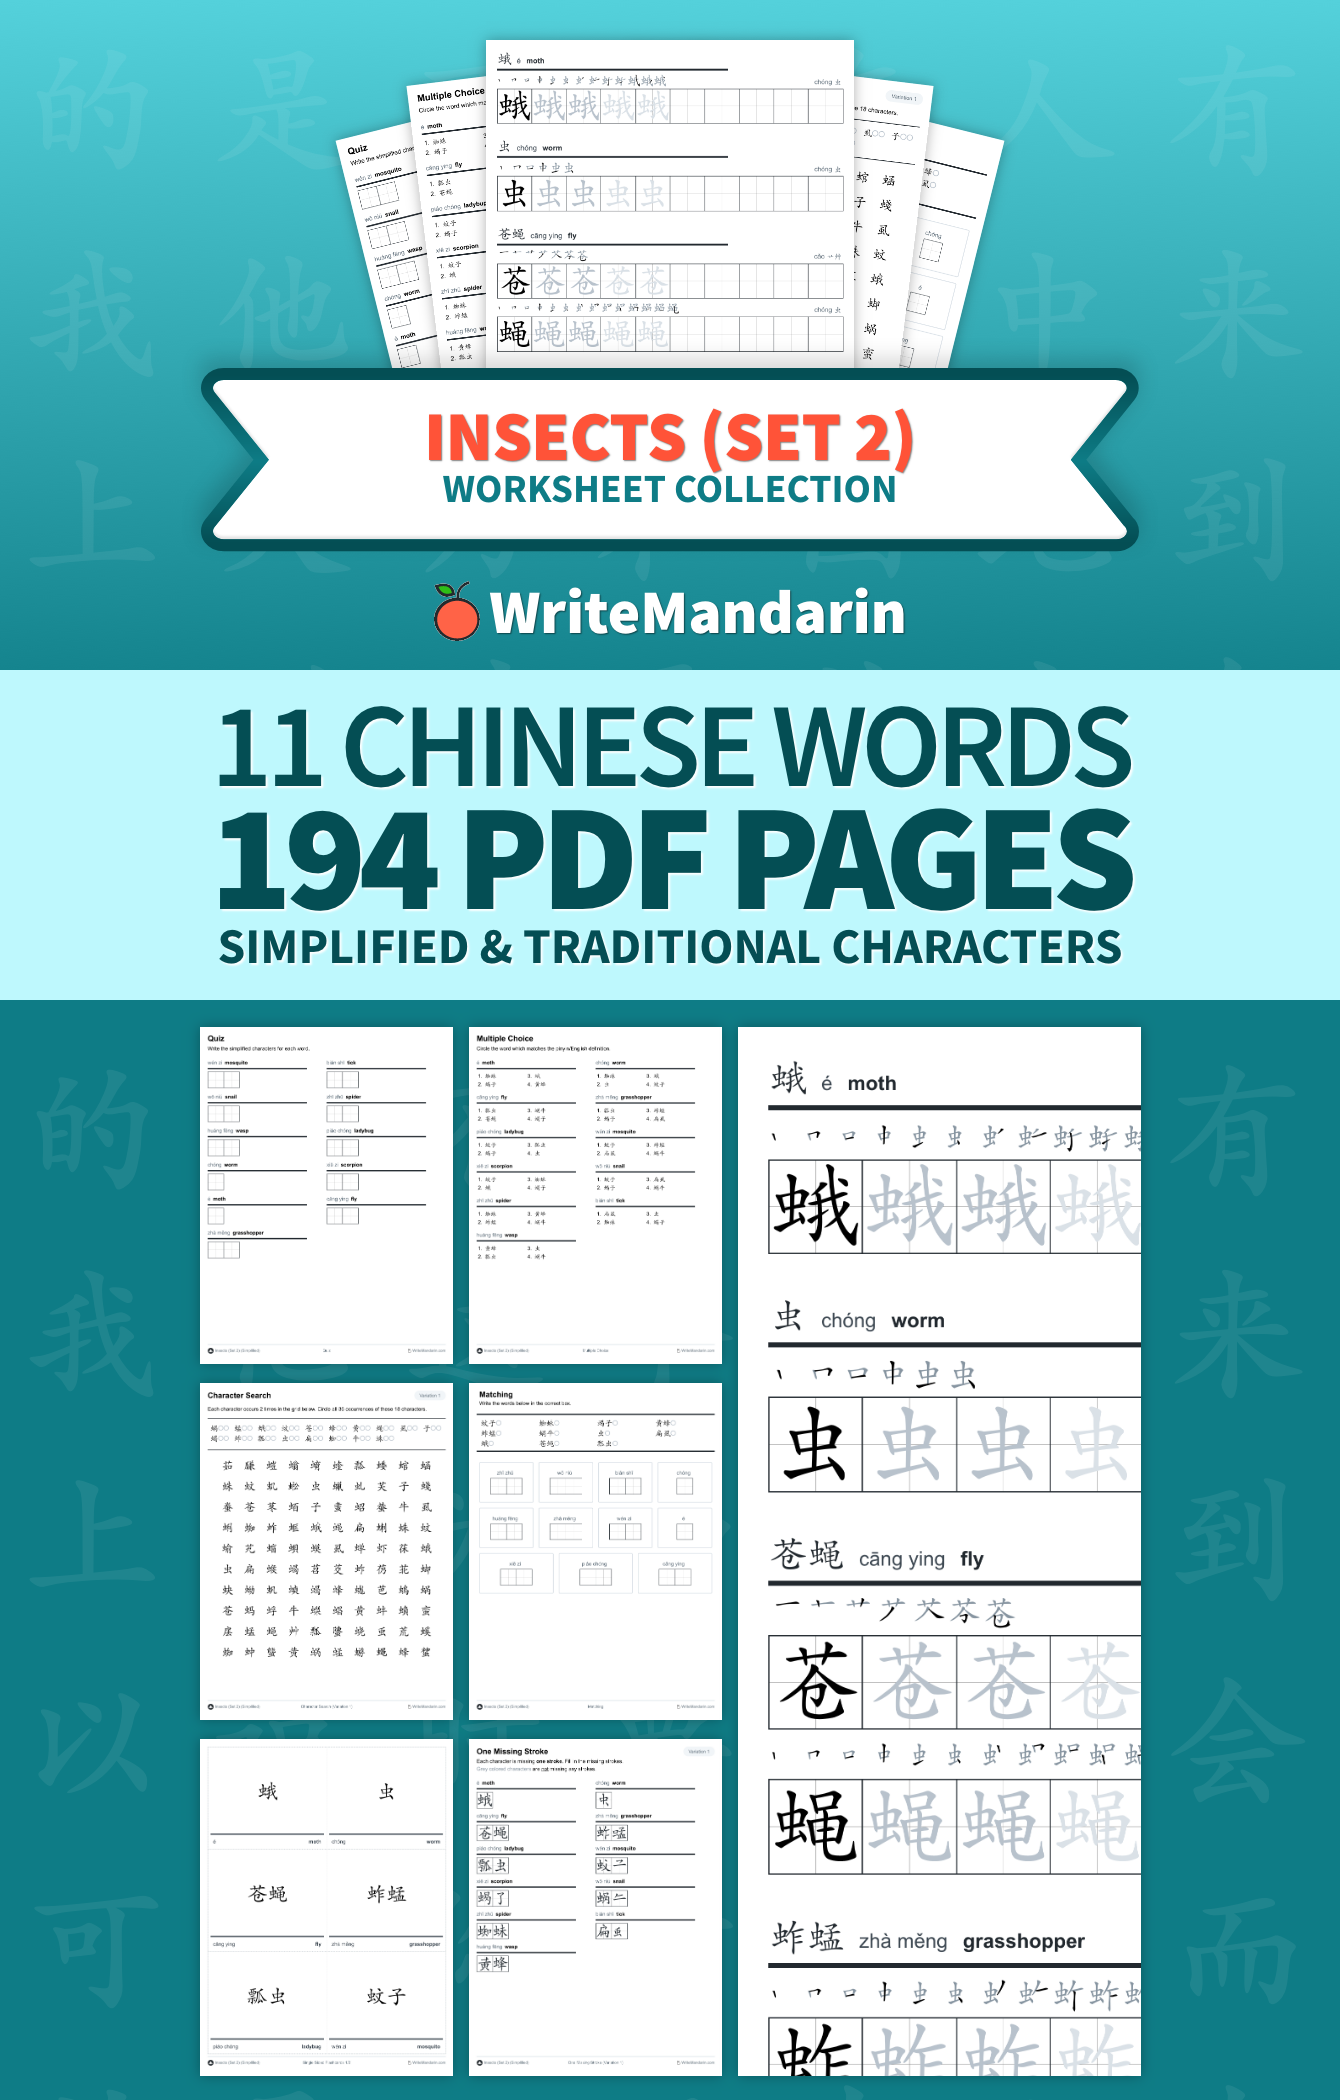 Preview image of Insects (Set 2) worksheet collection